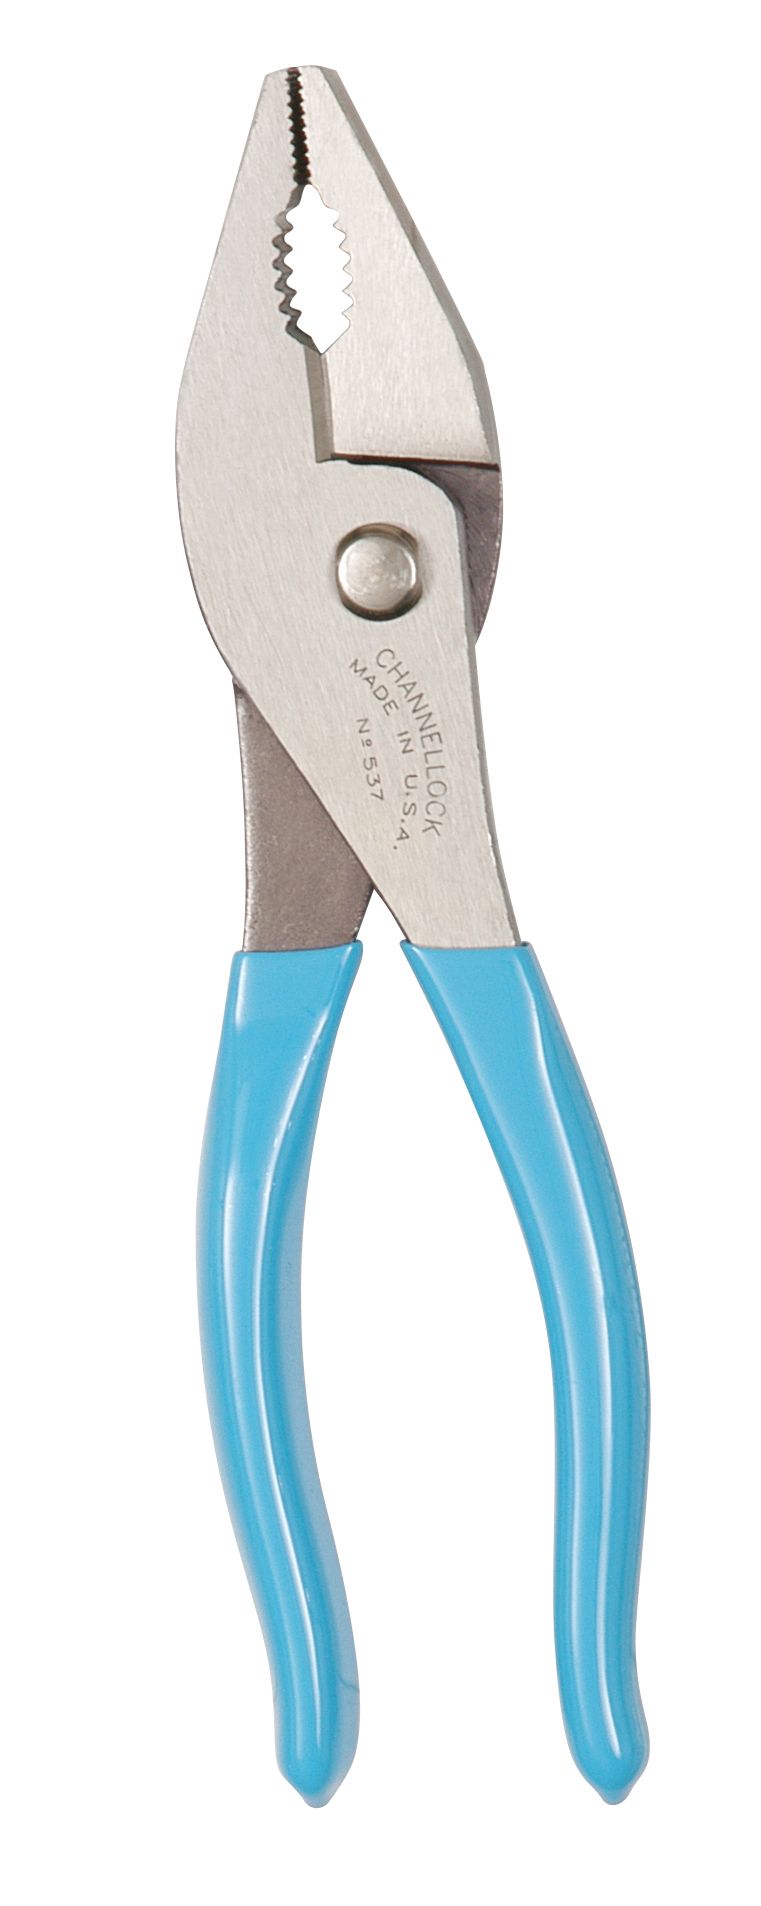 Channellock 7.63 in. Slip Joint Plier with Cutter